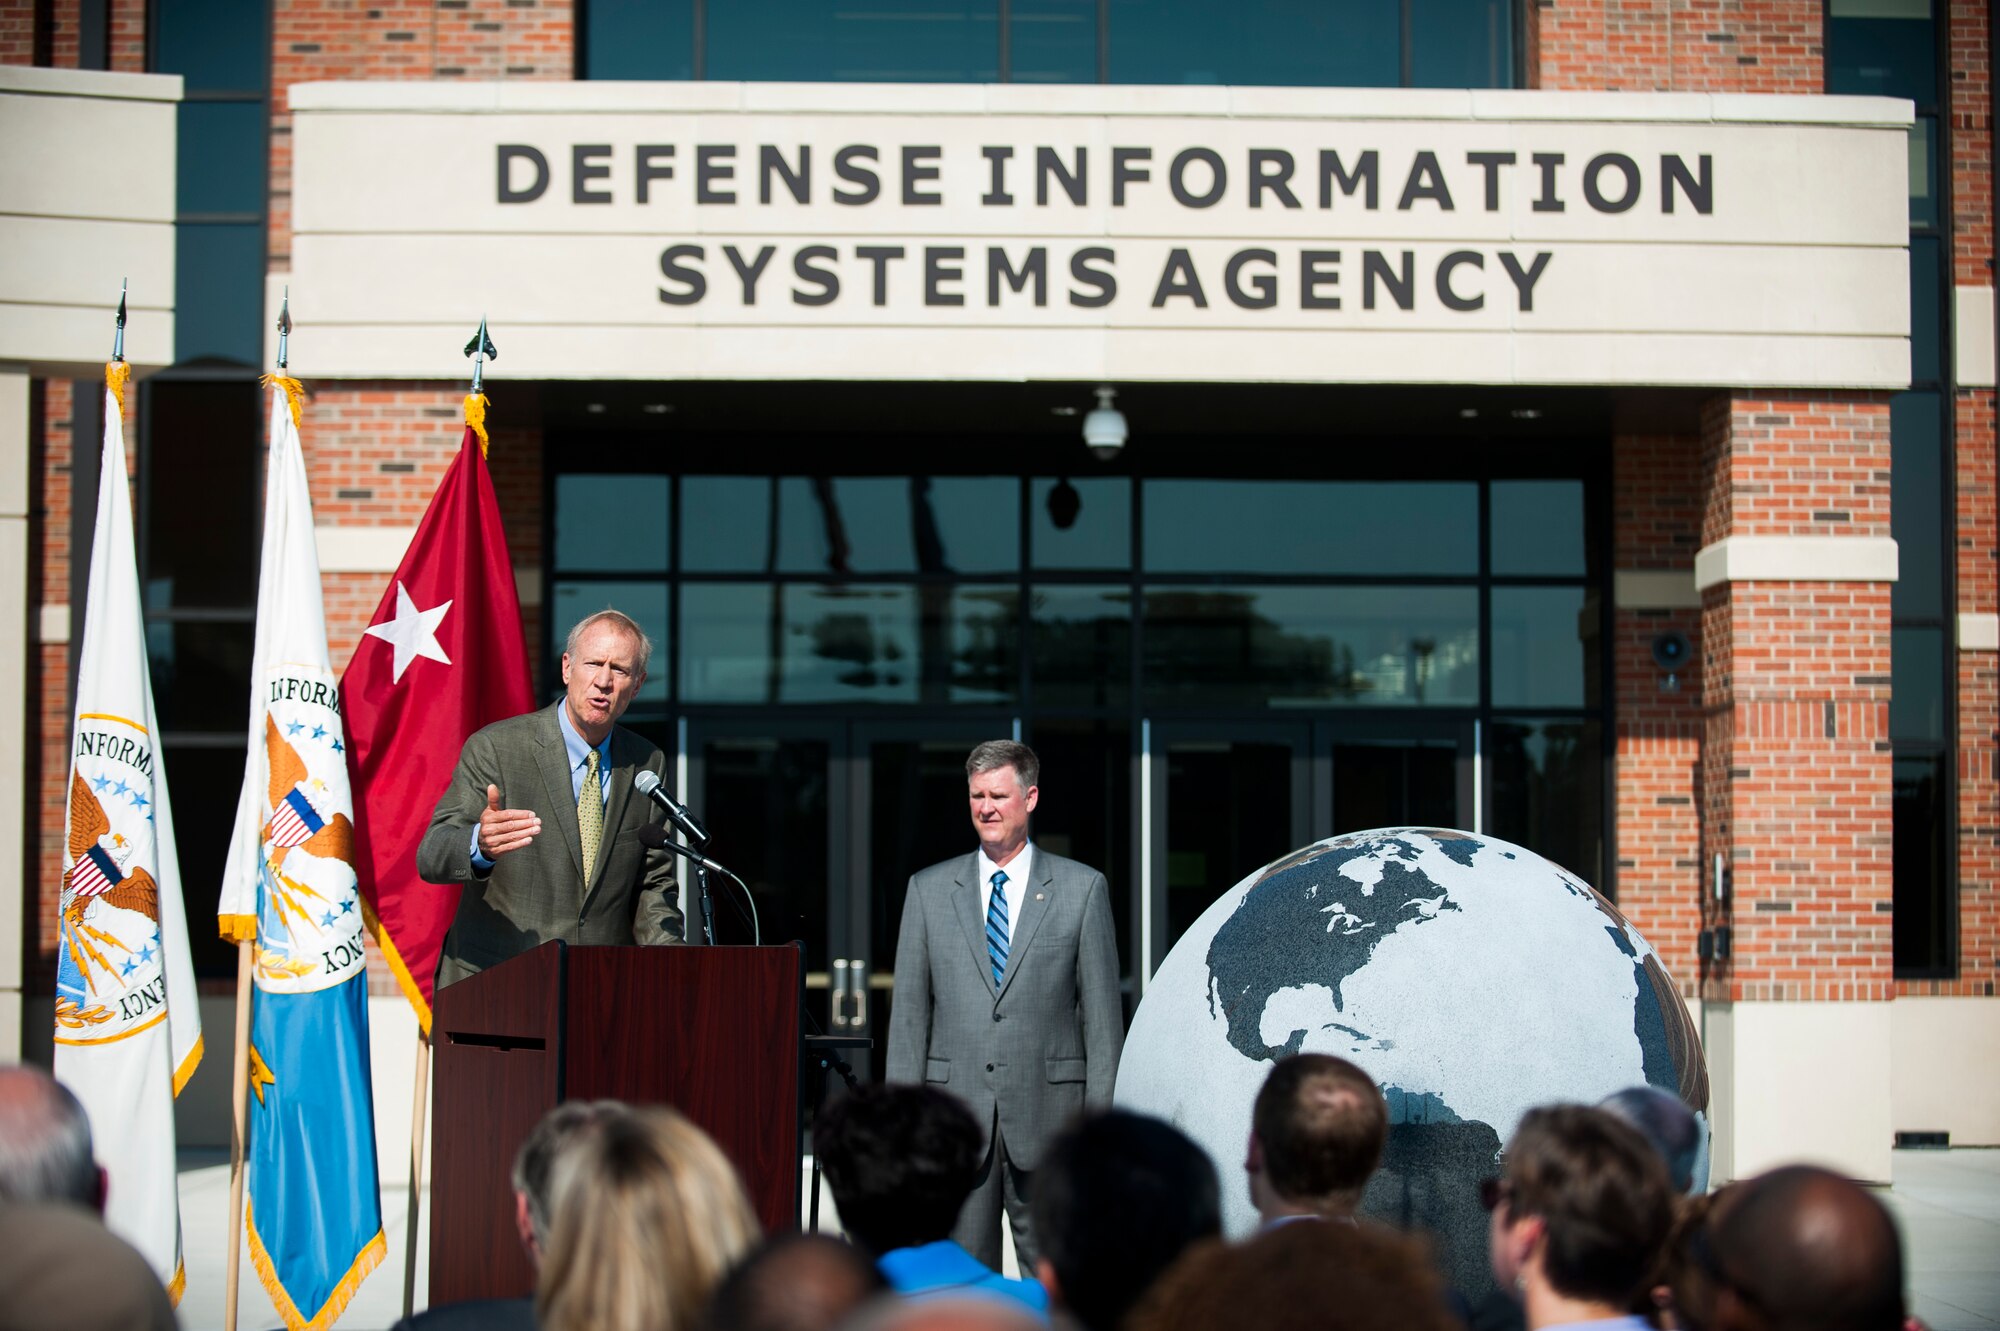 Ill. Gov. Bruce Rauner delivers a speech during a ribbon cutting ceremony for the new Defense Information Systems Agency compound at Scott Air Force Base, Ill., Aug. 11, 2016. Civil leaders from across the state attended the opening of the state of the art compound. (U.S. Air Force photo by Staff Sgt. Clayton Lenhardt/Released)